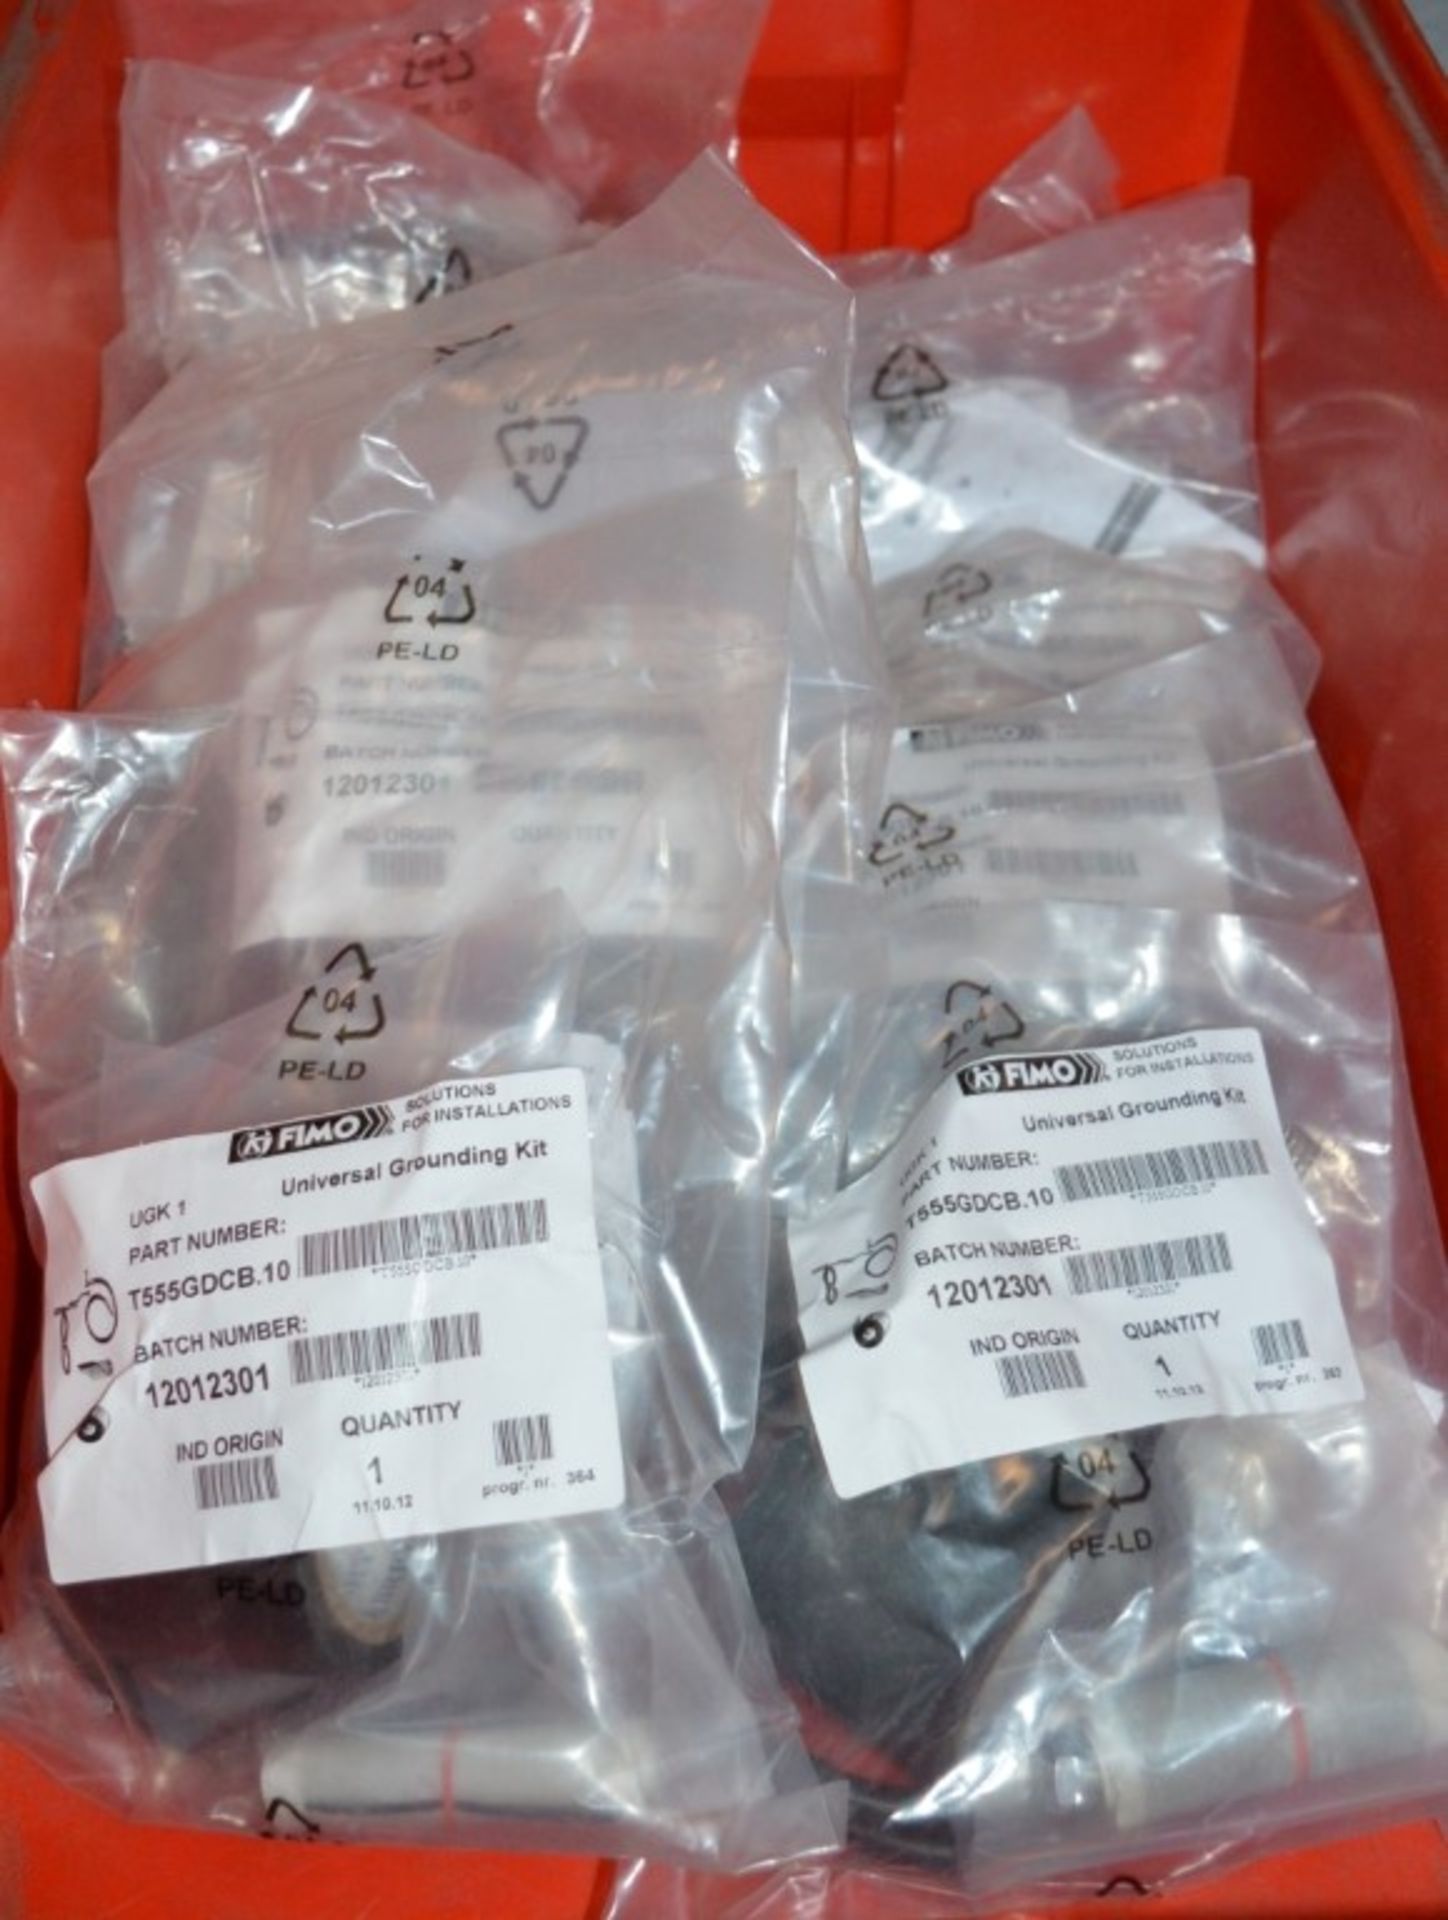 8 x Fimo Universal Grounding Kits - Part Number T555GDCB.10 - Brand New in Packets - Please See - Image 8 of 8